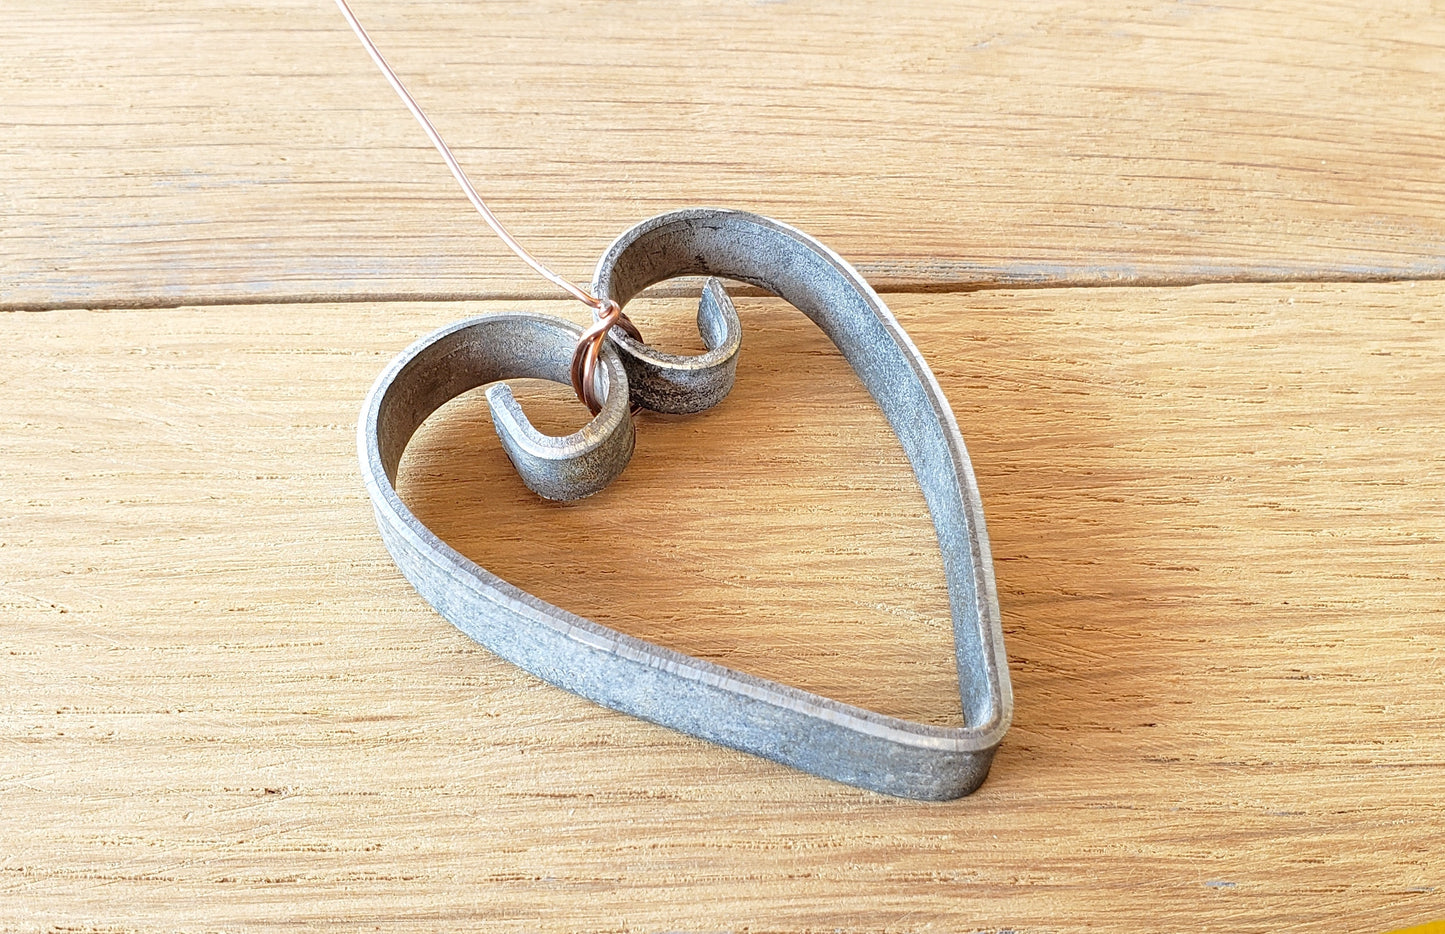 Wine Barrel Ring Heart Ornaments - Cuvore - Made from retired Napa wine barrel rings. 100% Recycled!